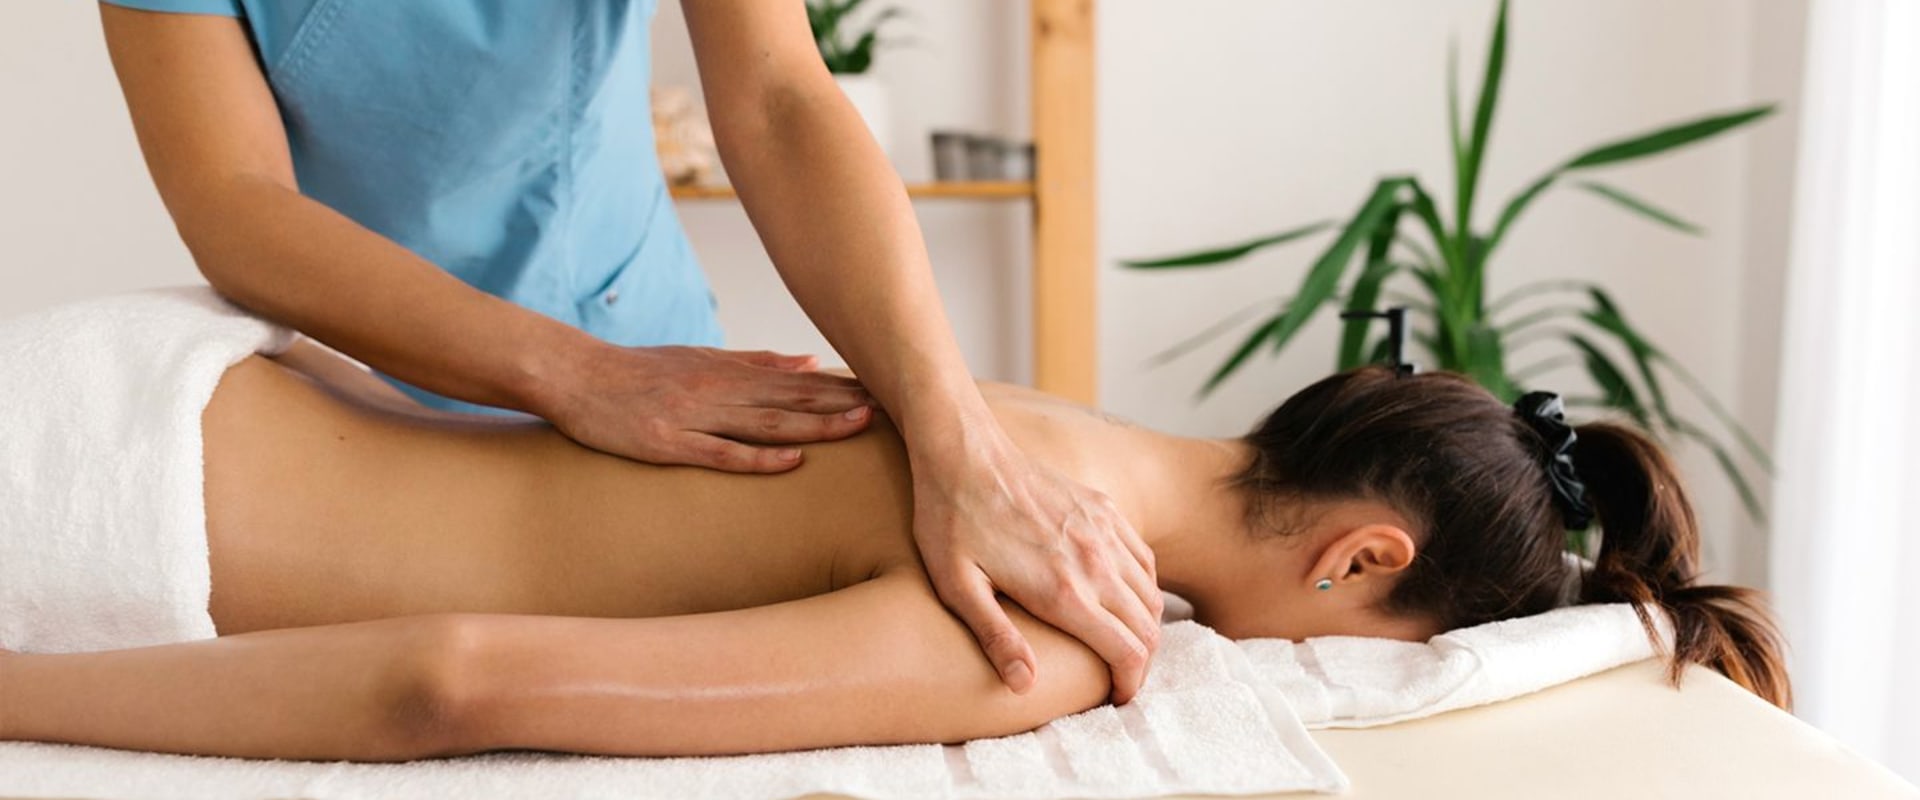 Where to massage therapy?